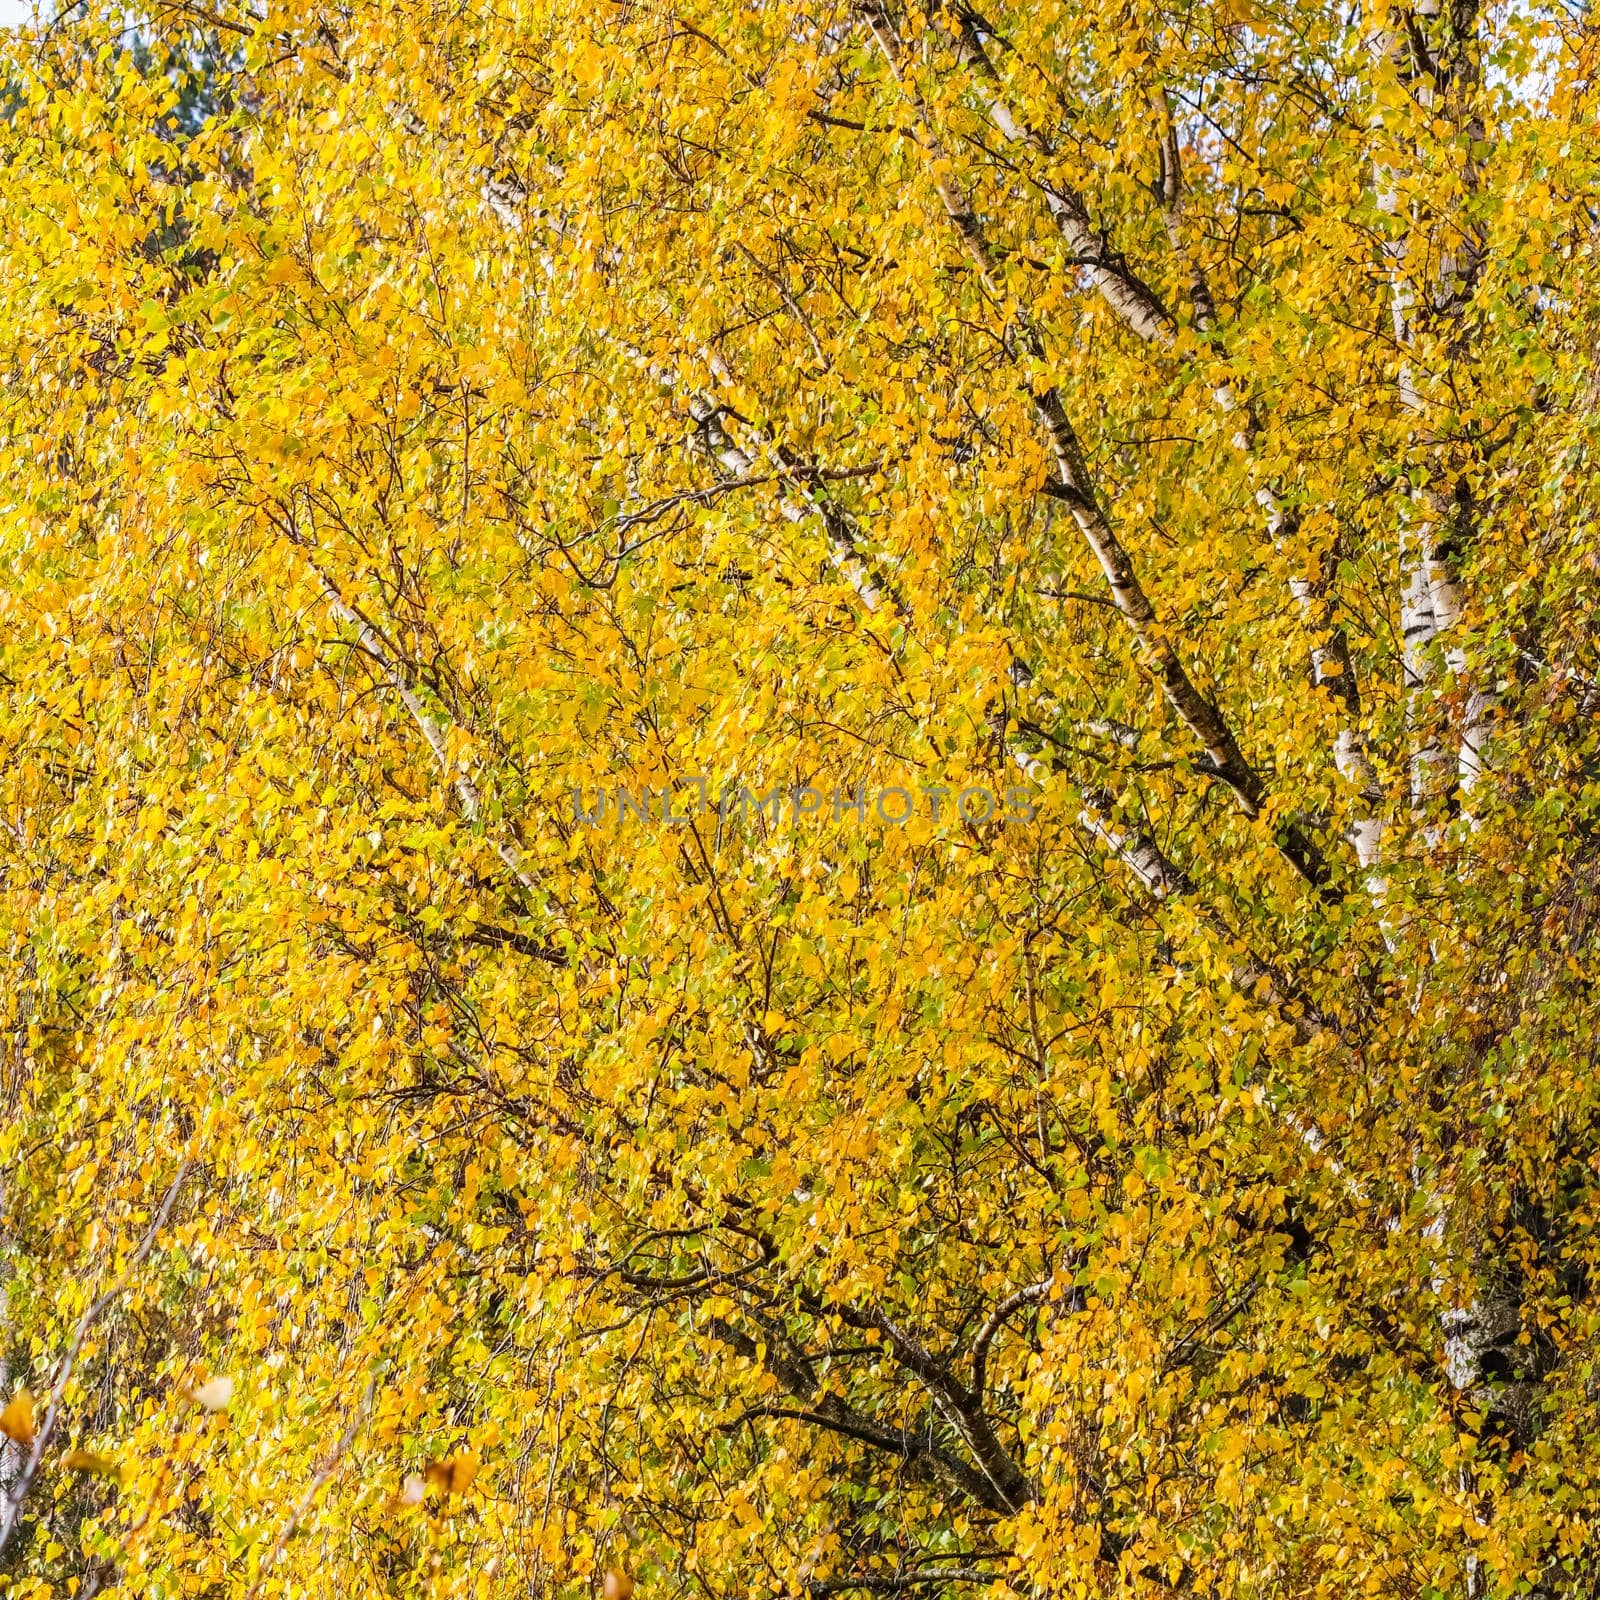 Bright yellow leaves on birch branches. Autumn background